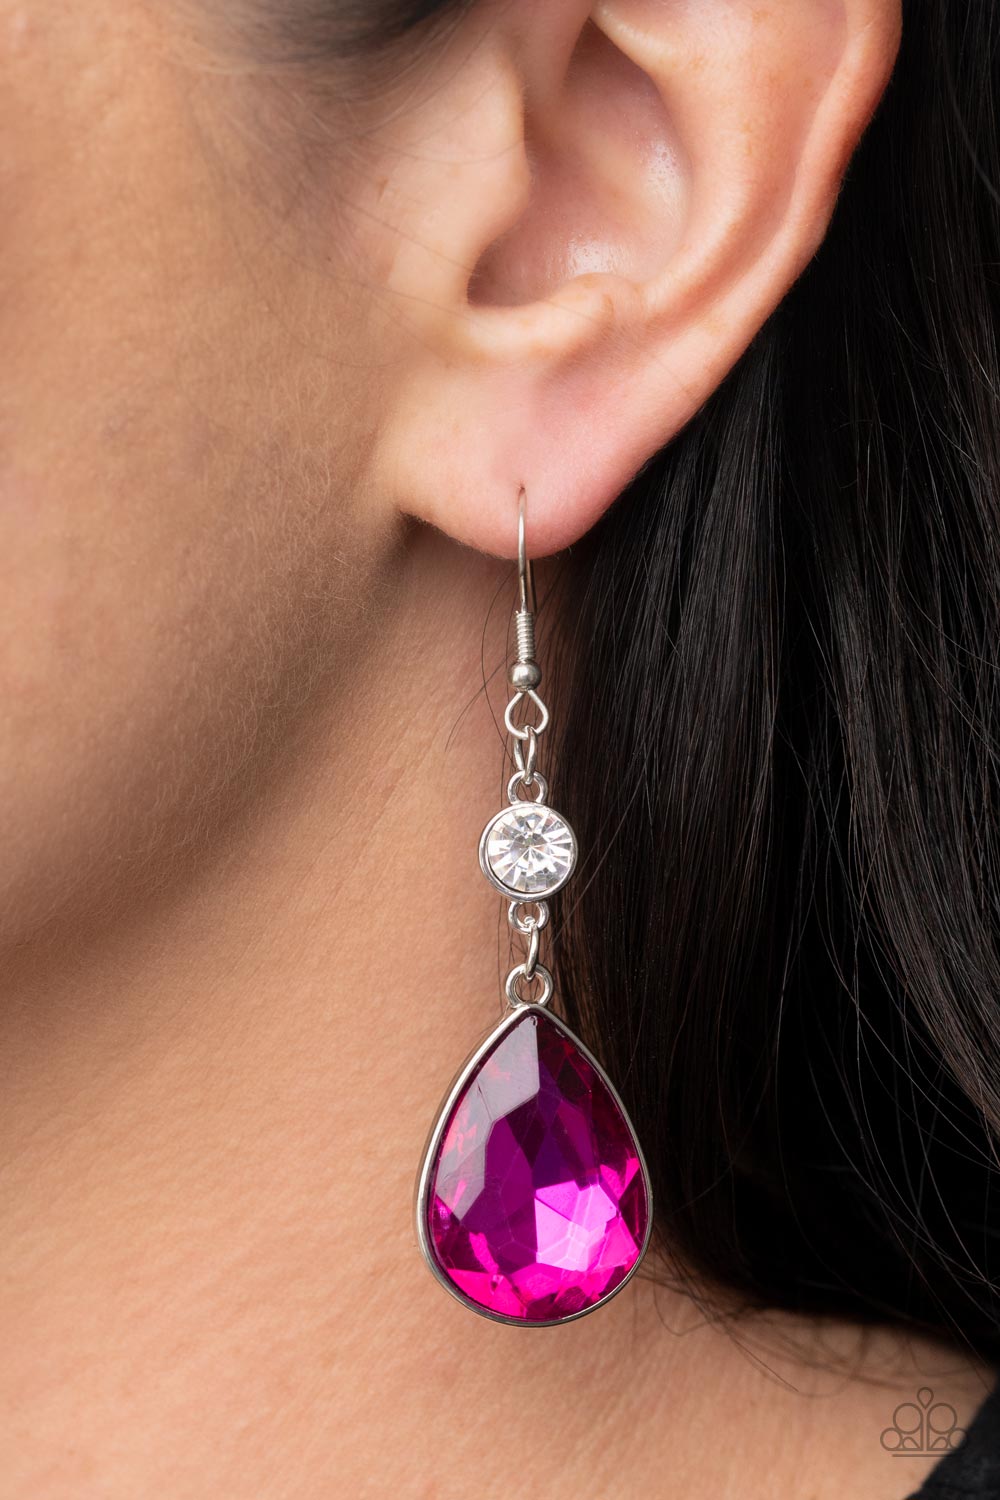 Paparazzi Smile For The Camera Pink Fishhook Earrings - P5RE-PKXX-251XX